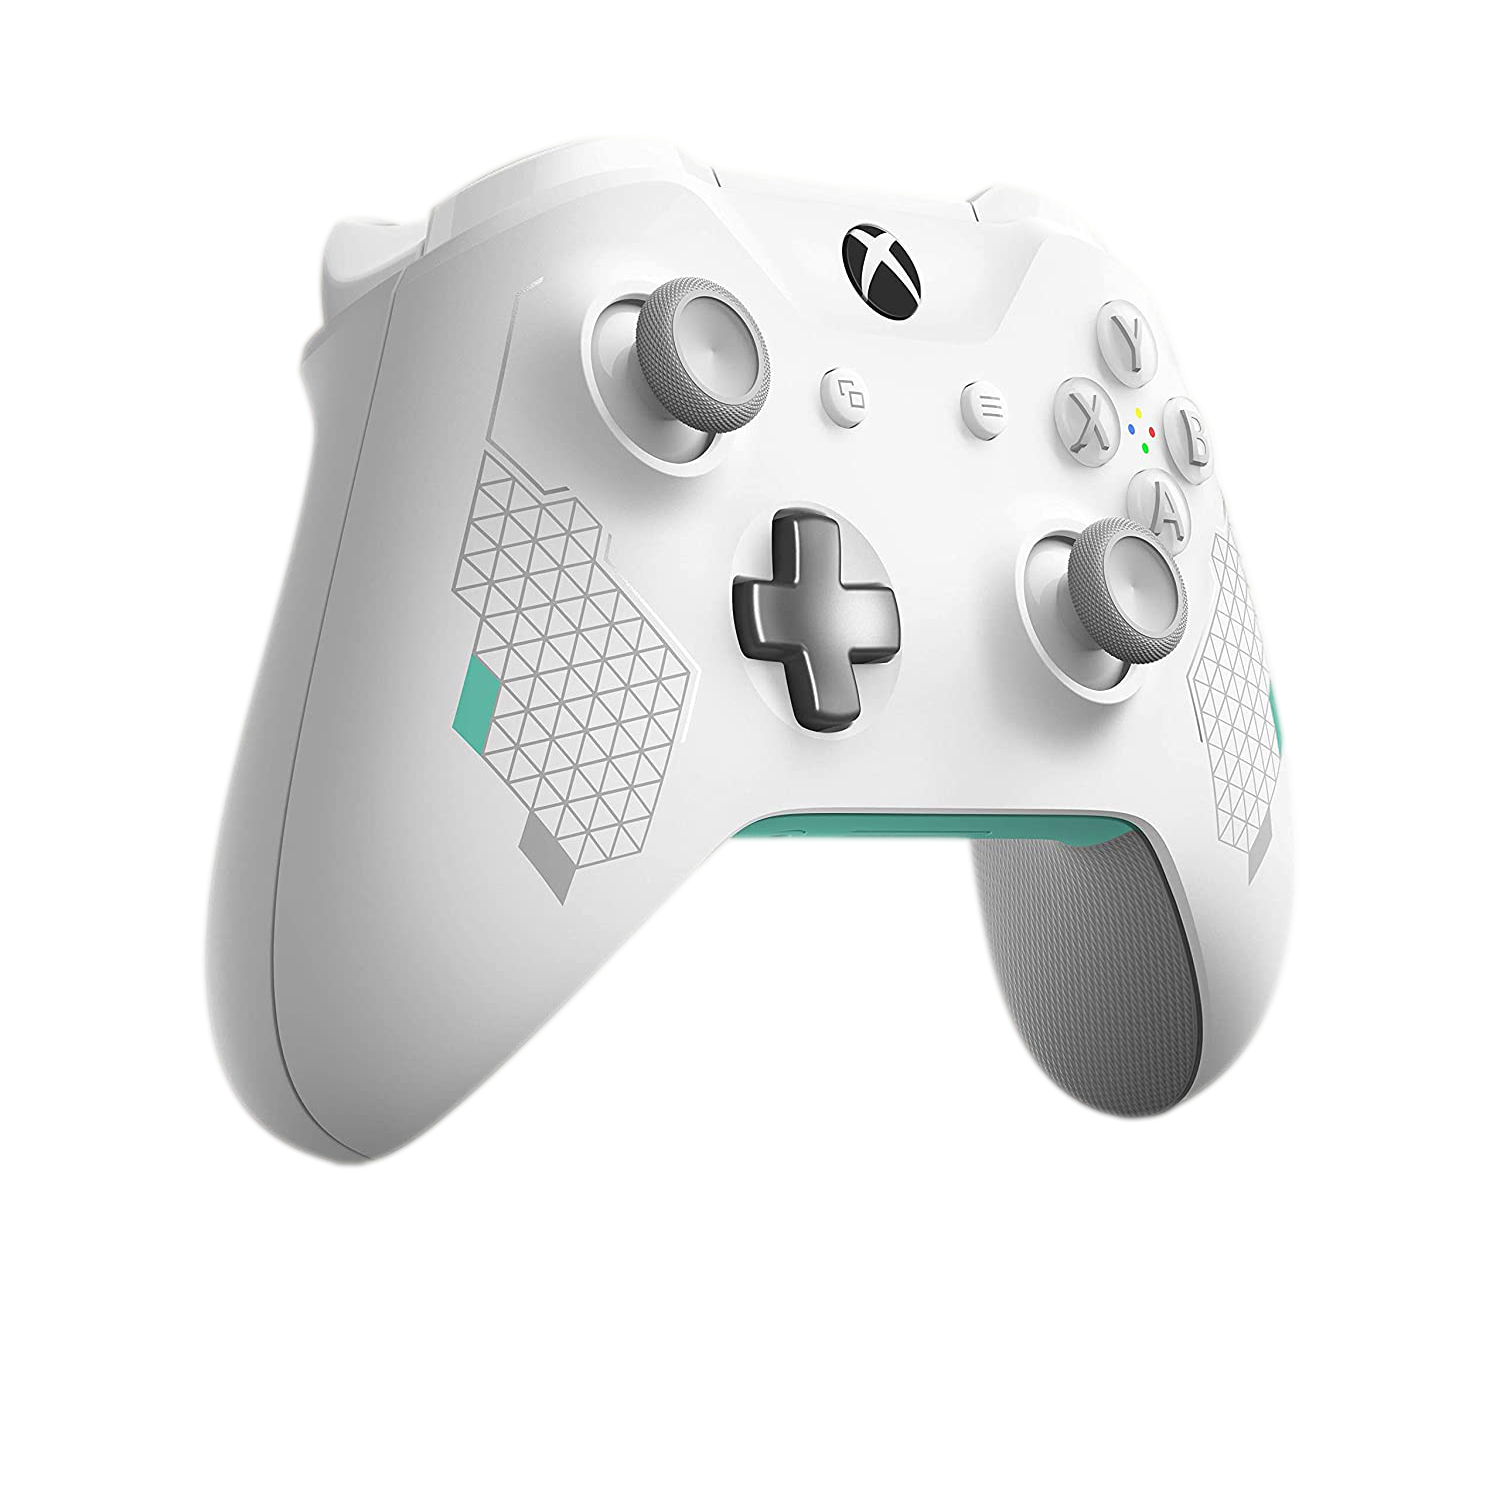 Microsoft-Official-Xbox-Controller-Sports-White-Special-Edition-12-Months-Warranty